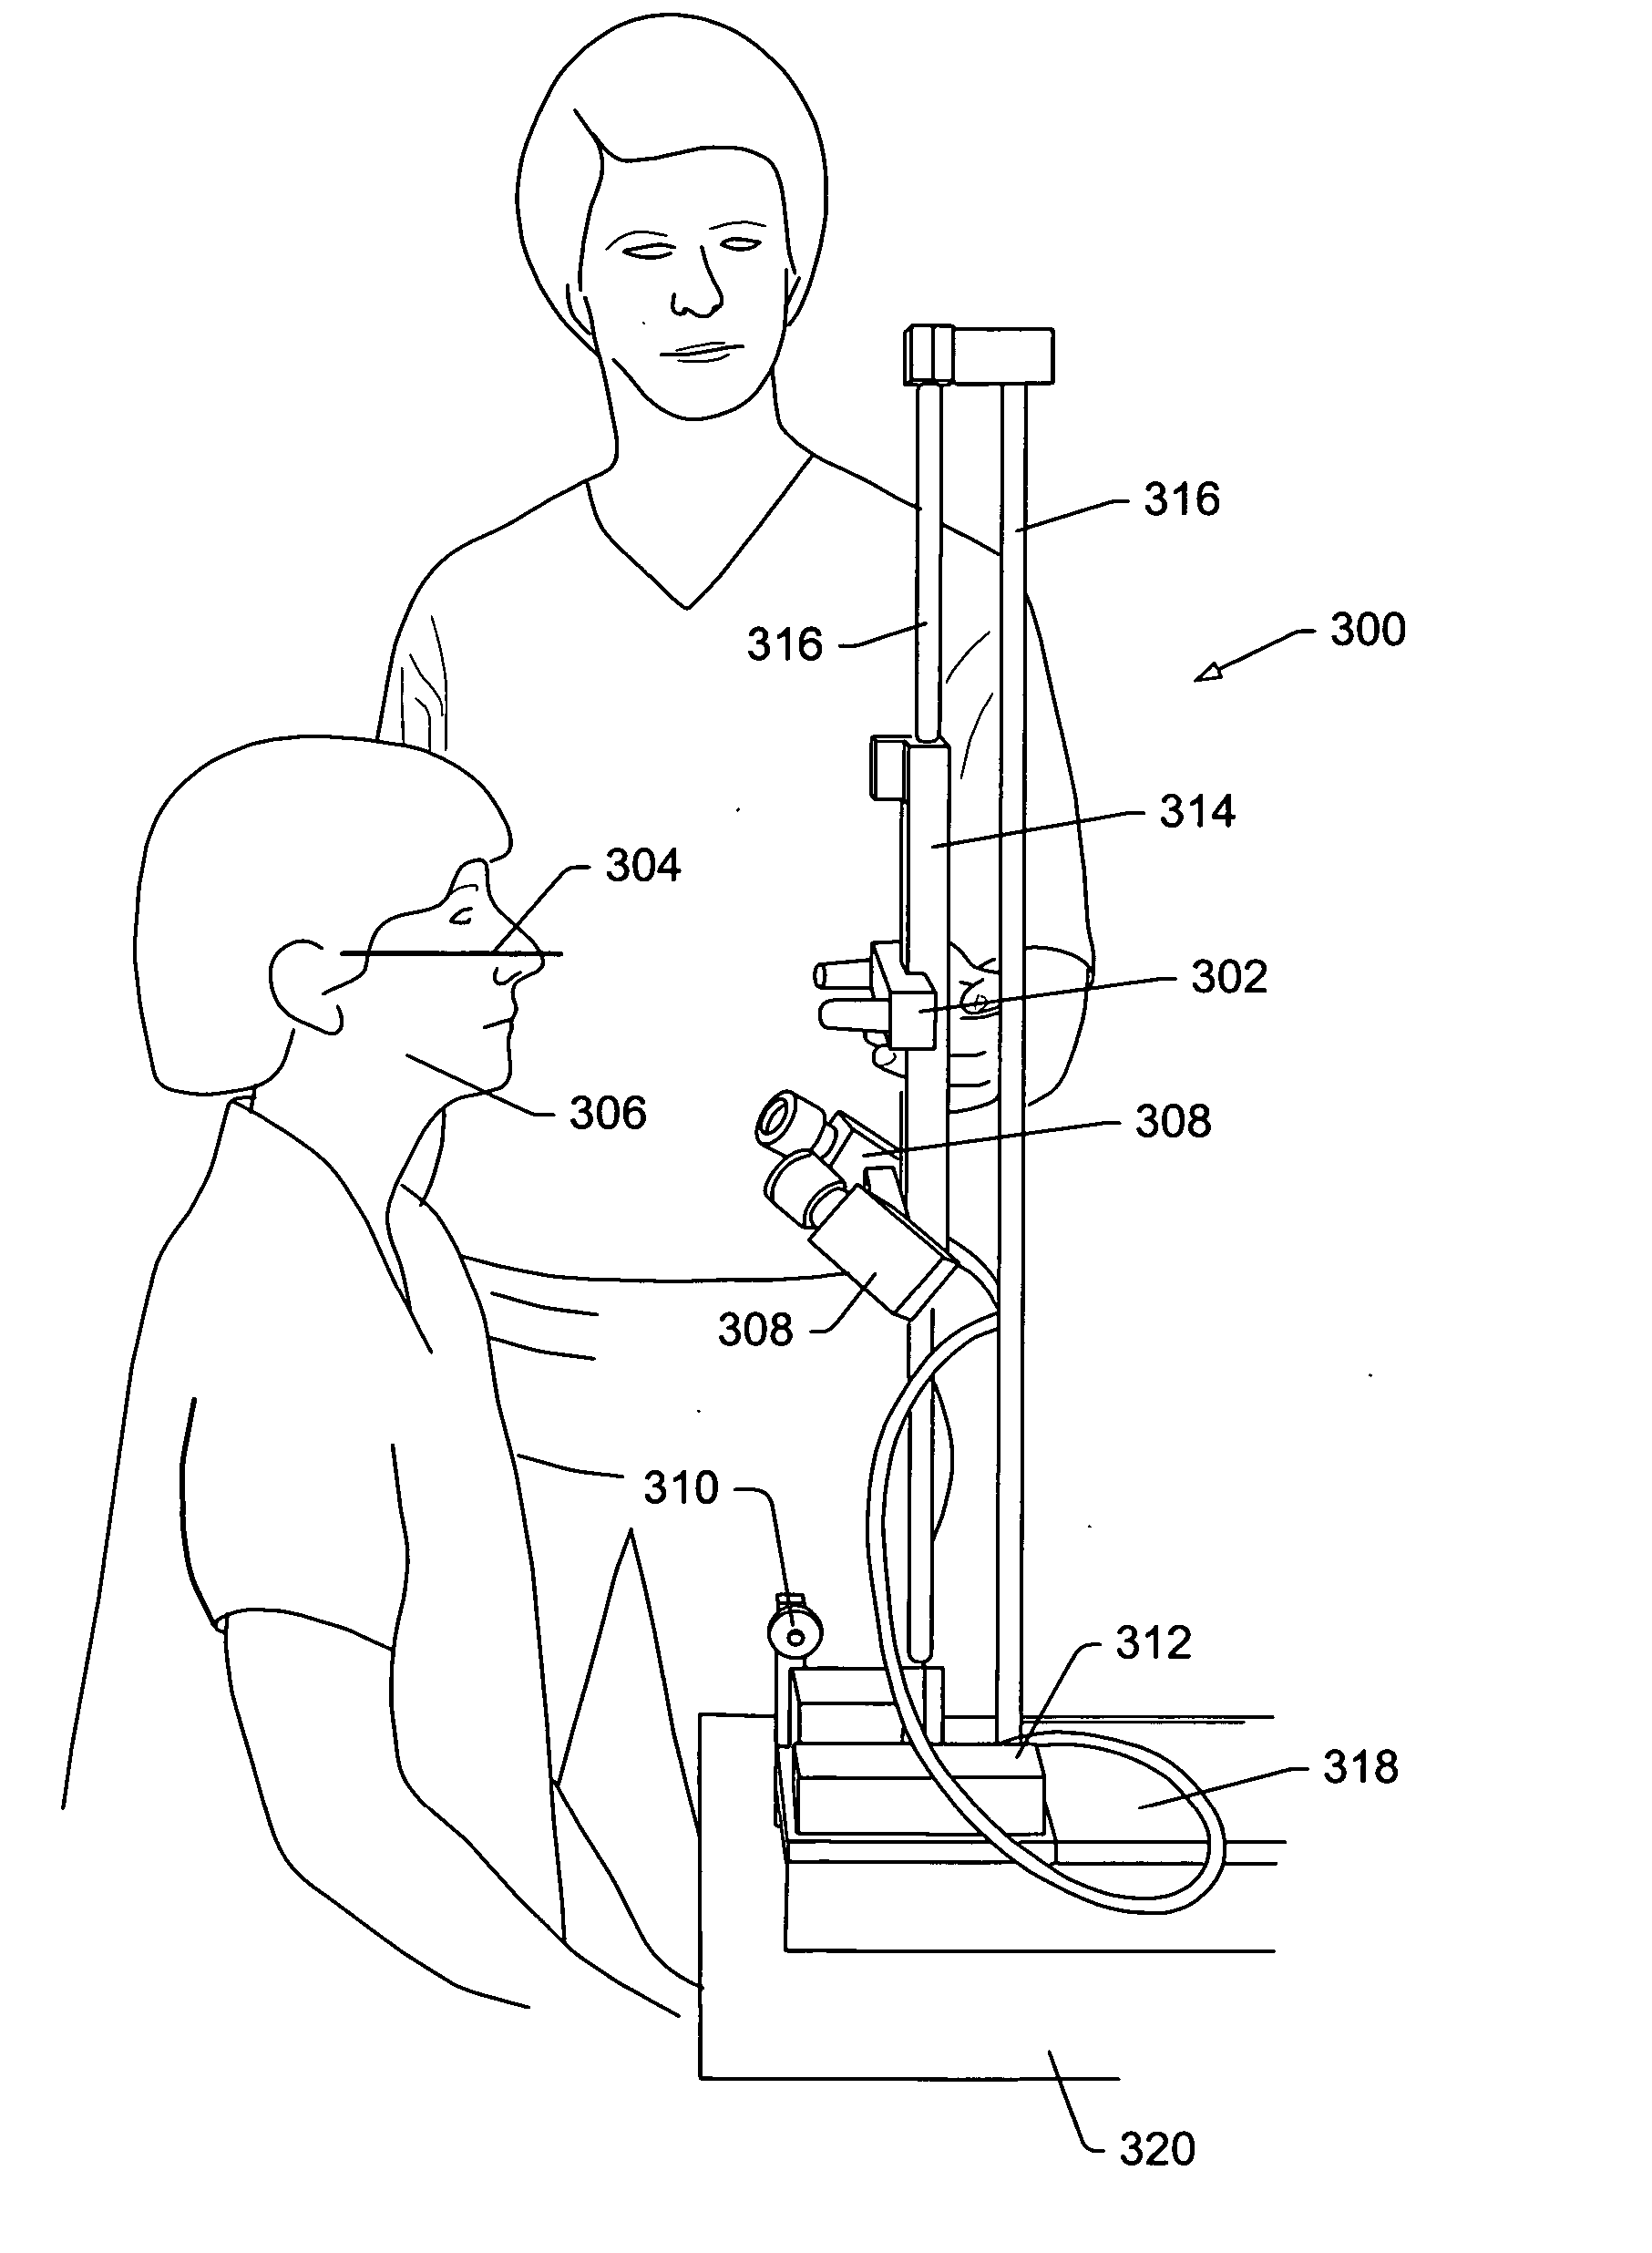 System and method for design and manufacture of custom face masks